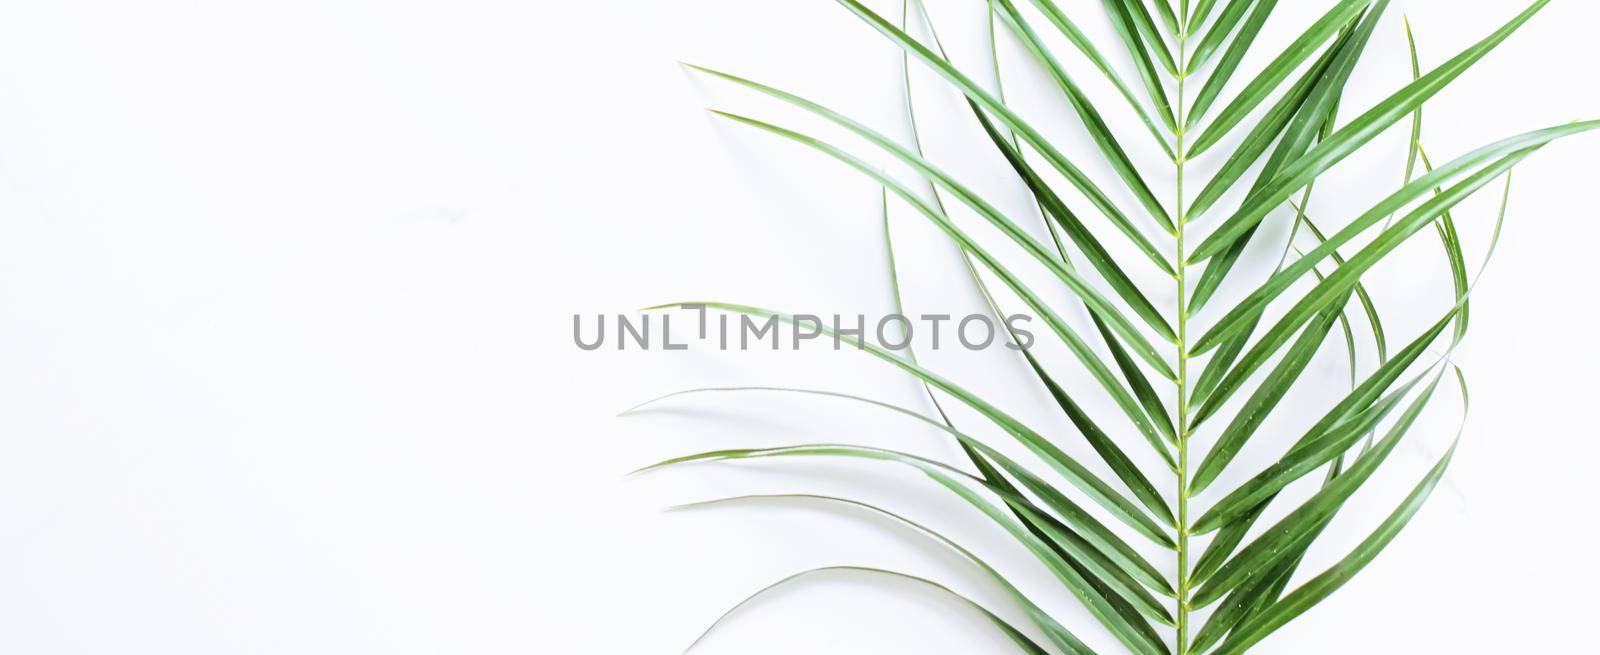 Green exotic leaf on white marble background, luxury branding flat lay and brand identity design for mockup by Anneleven